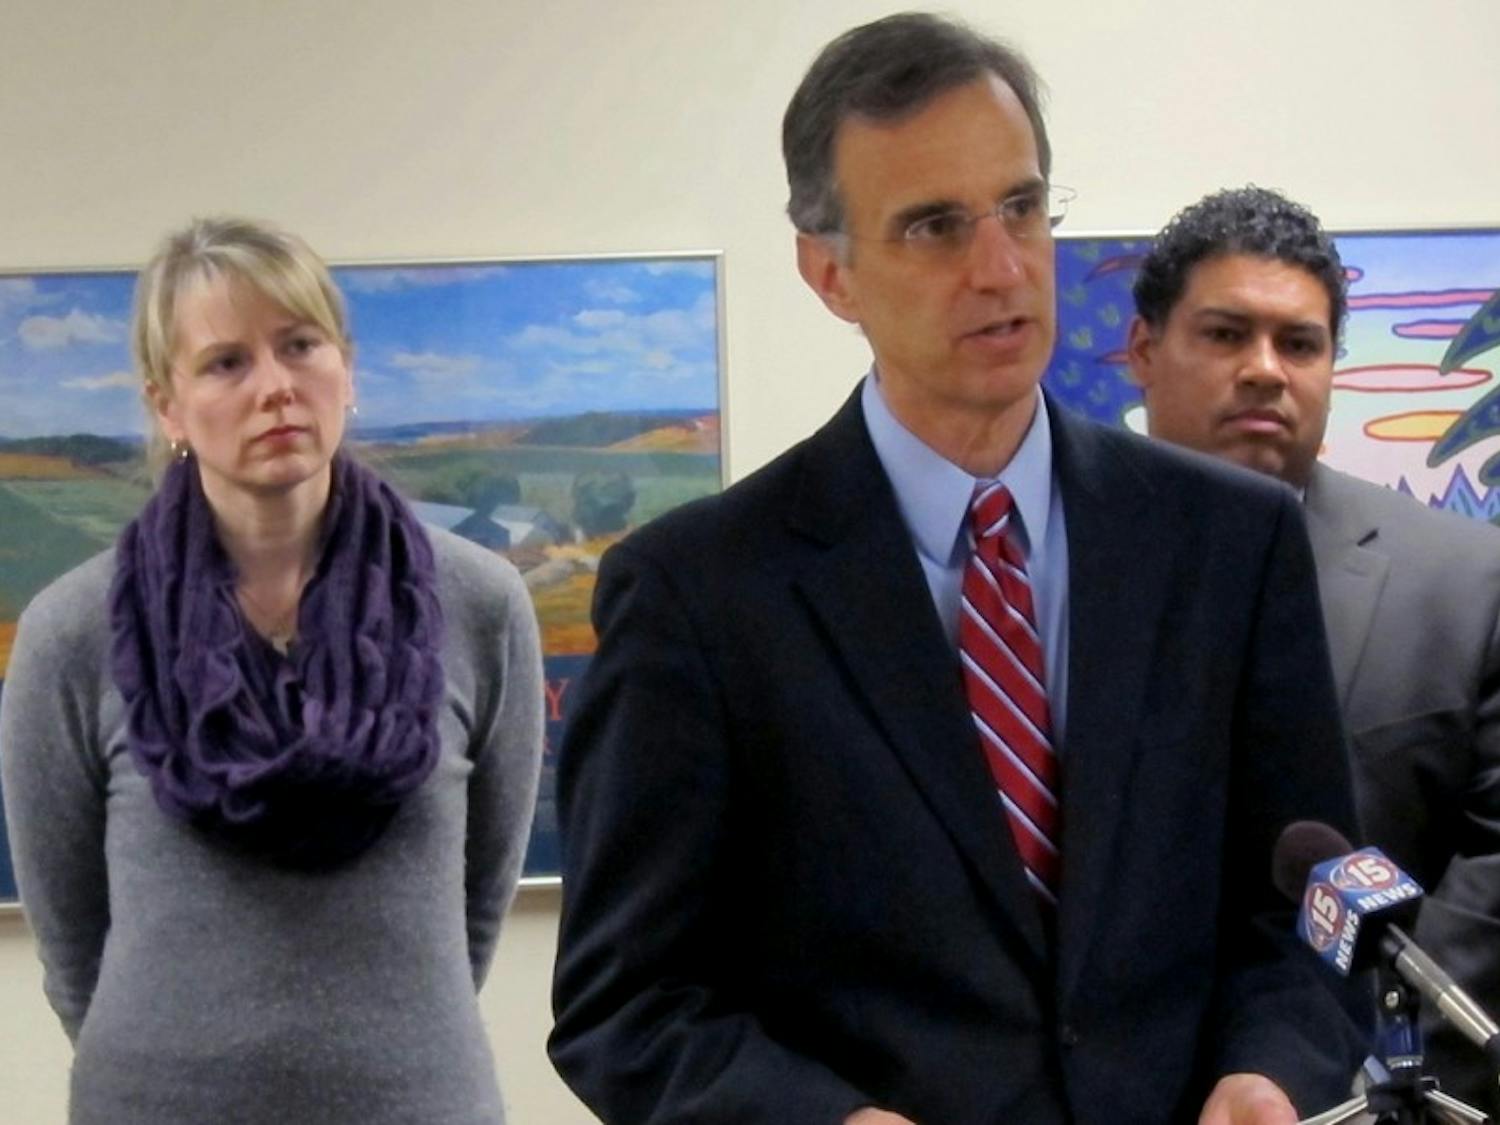 Dane County Executive Joe Parisi announced Tuesday he would be allocating over $2 million for affordable housing.